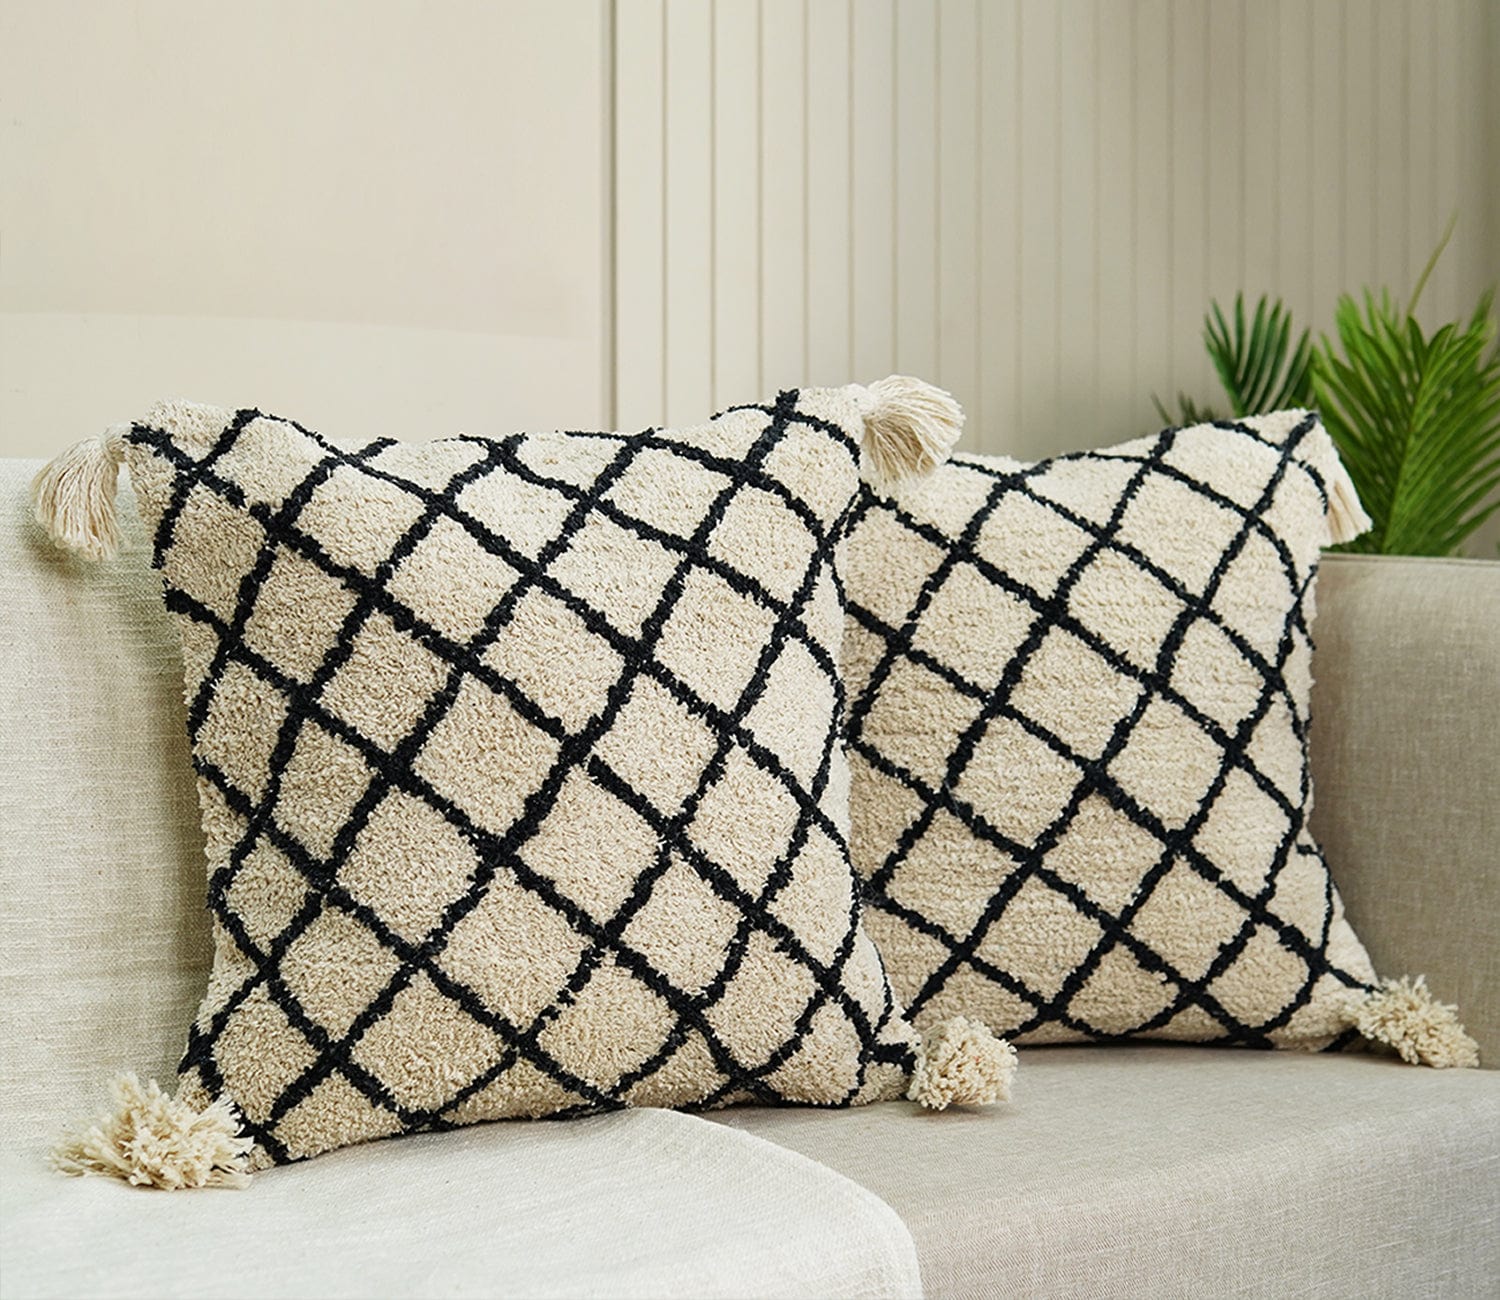 Hand Woven Ivory Cotton Cushion Covers - Set of 2 (18 x 18 inch)